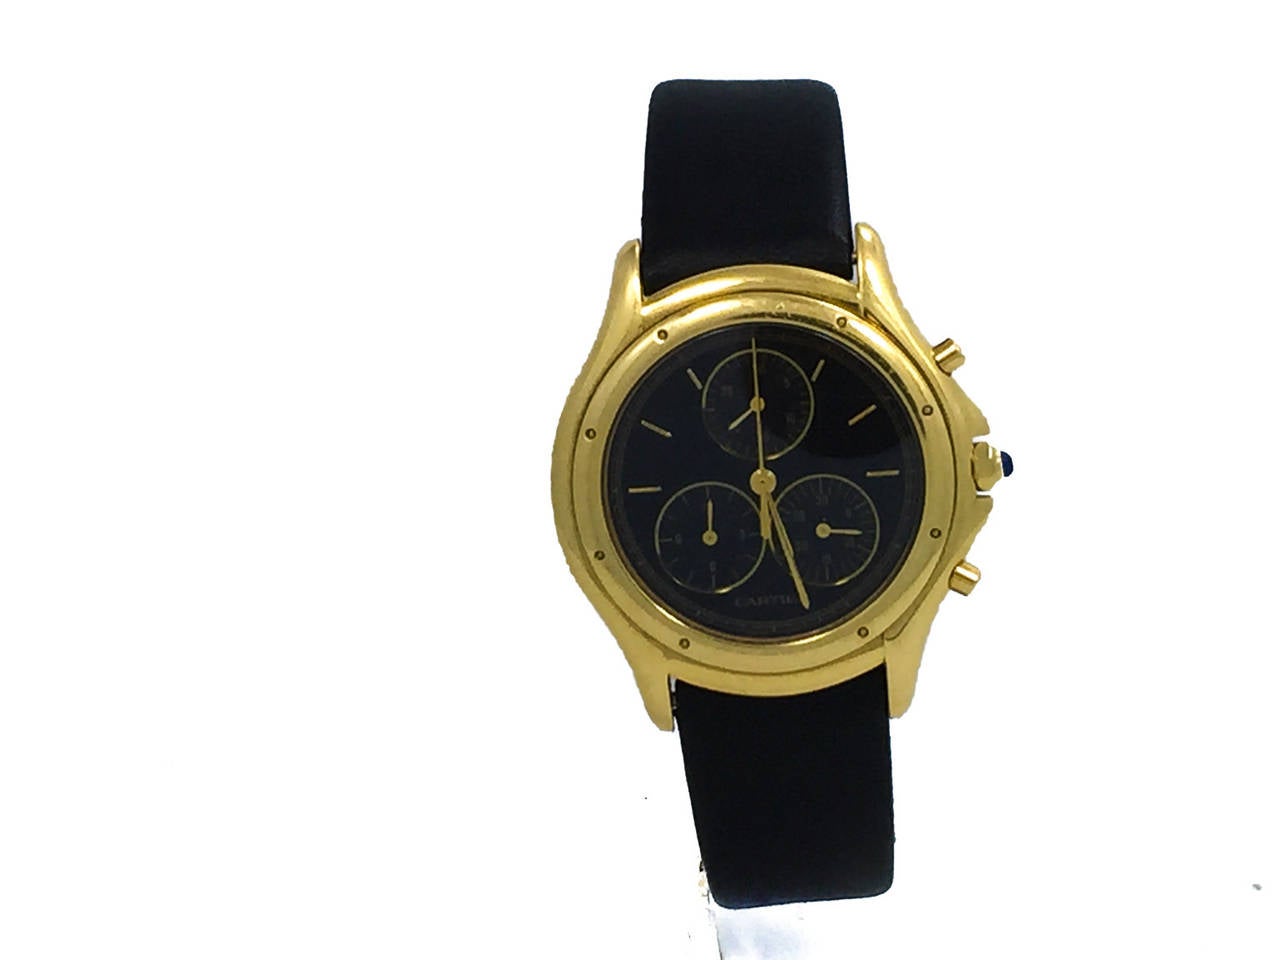 Mens Cartier Cougar Chronograph 18k Yellow Gold Watch. The Watch is In Great Condition and all Functions Work Perfectly, Movement is Battery Operated. The Watch is on a Generic Strap & Buckle.